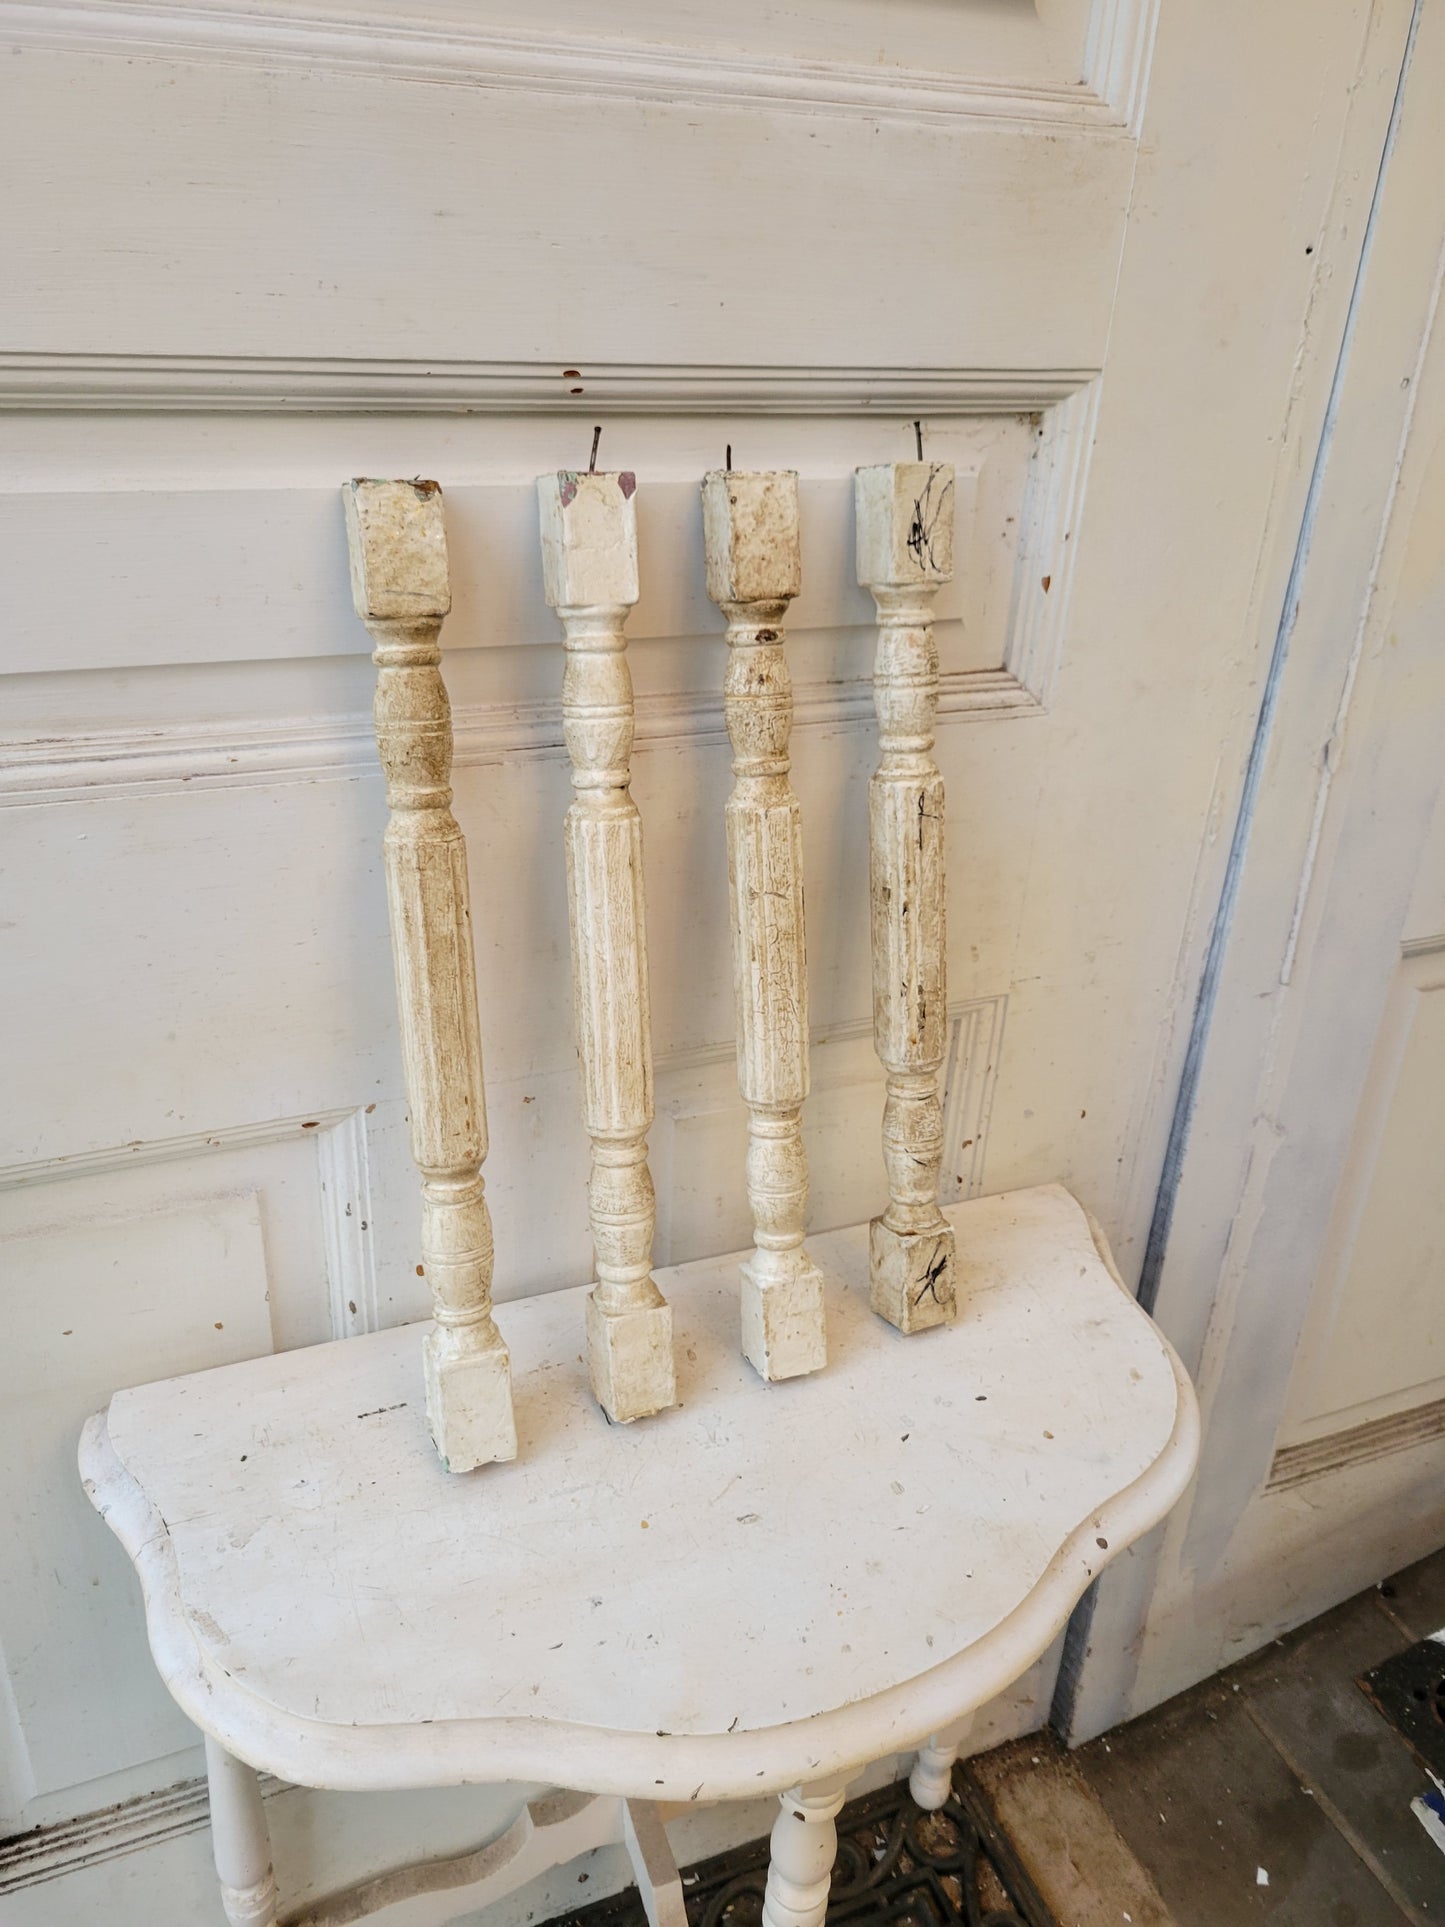 Set of 10 Antique White Spindles, Victorian Staircase Spindles or Balusters